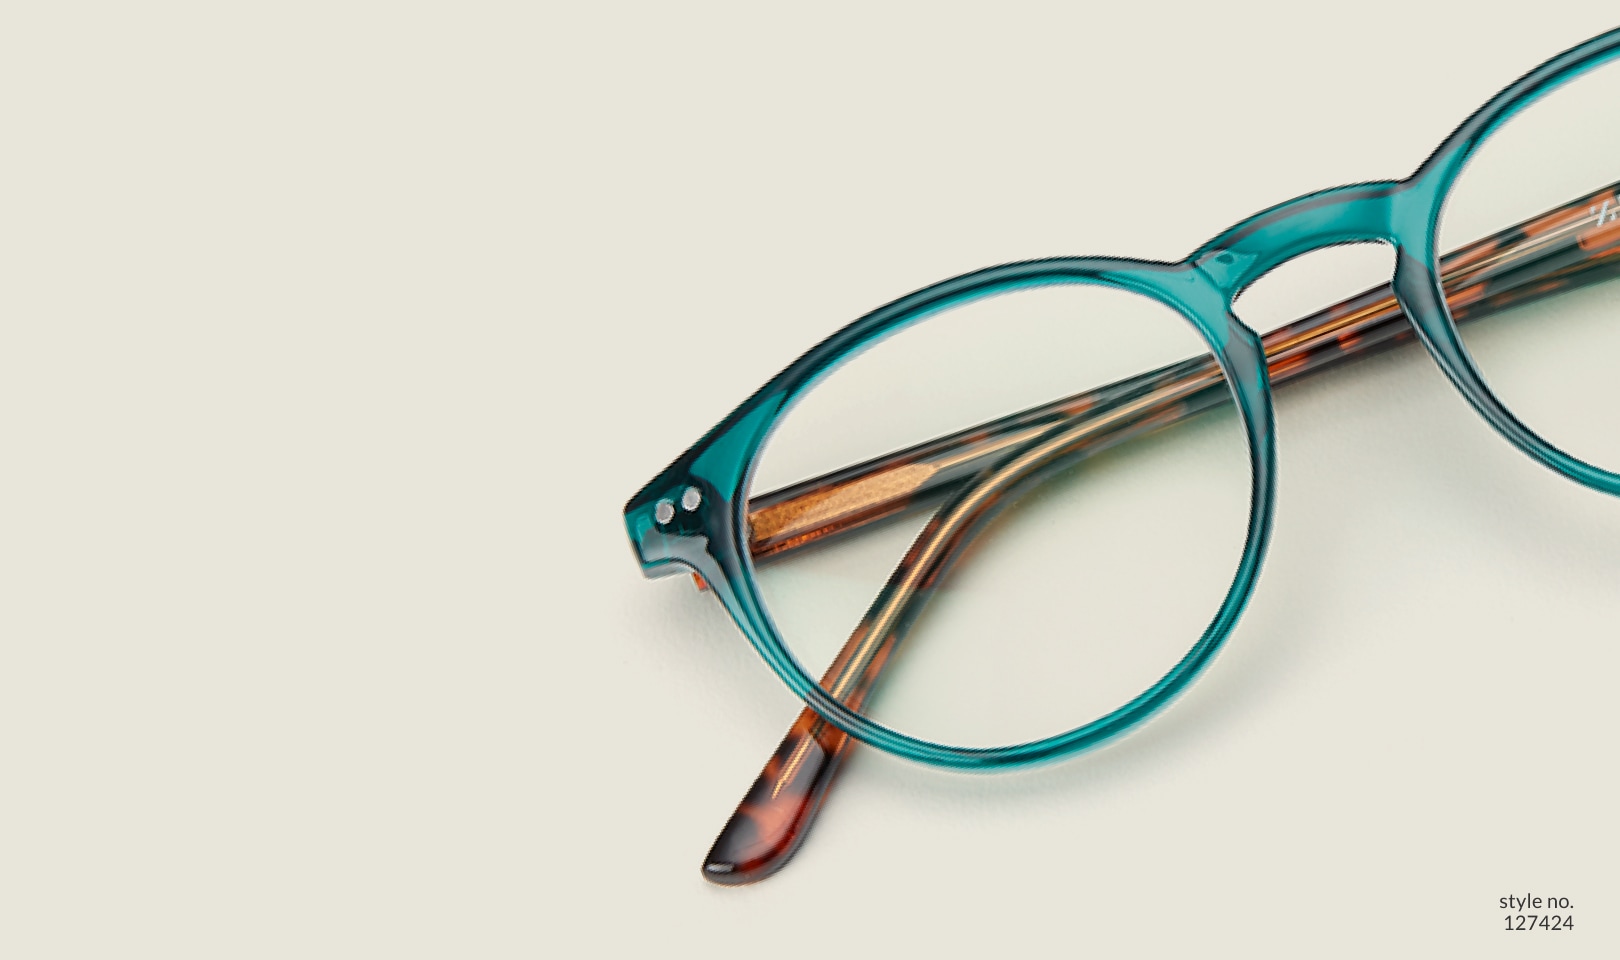 Image of Zenni green round glasses style #127424 shown with a light green background.